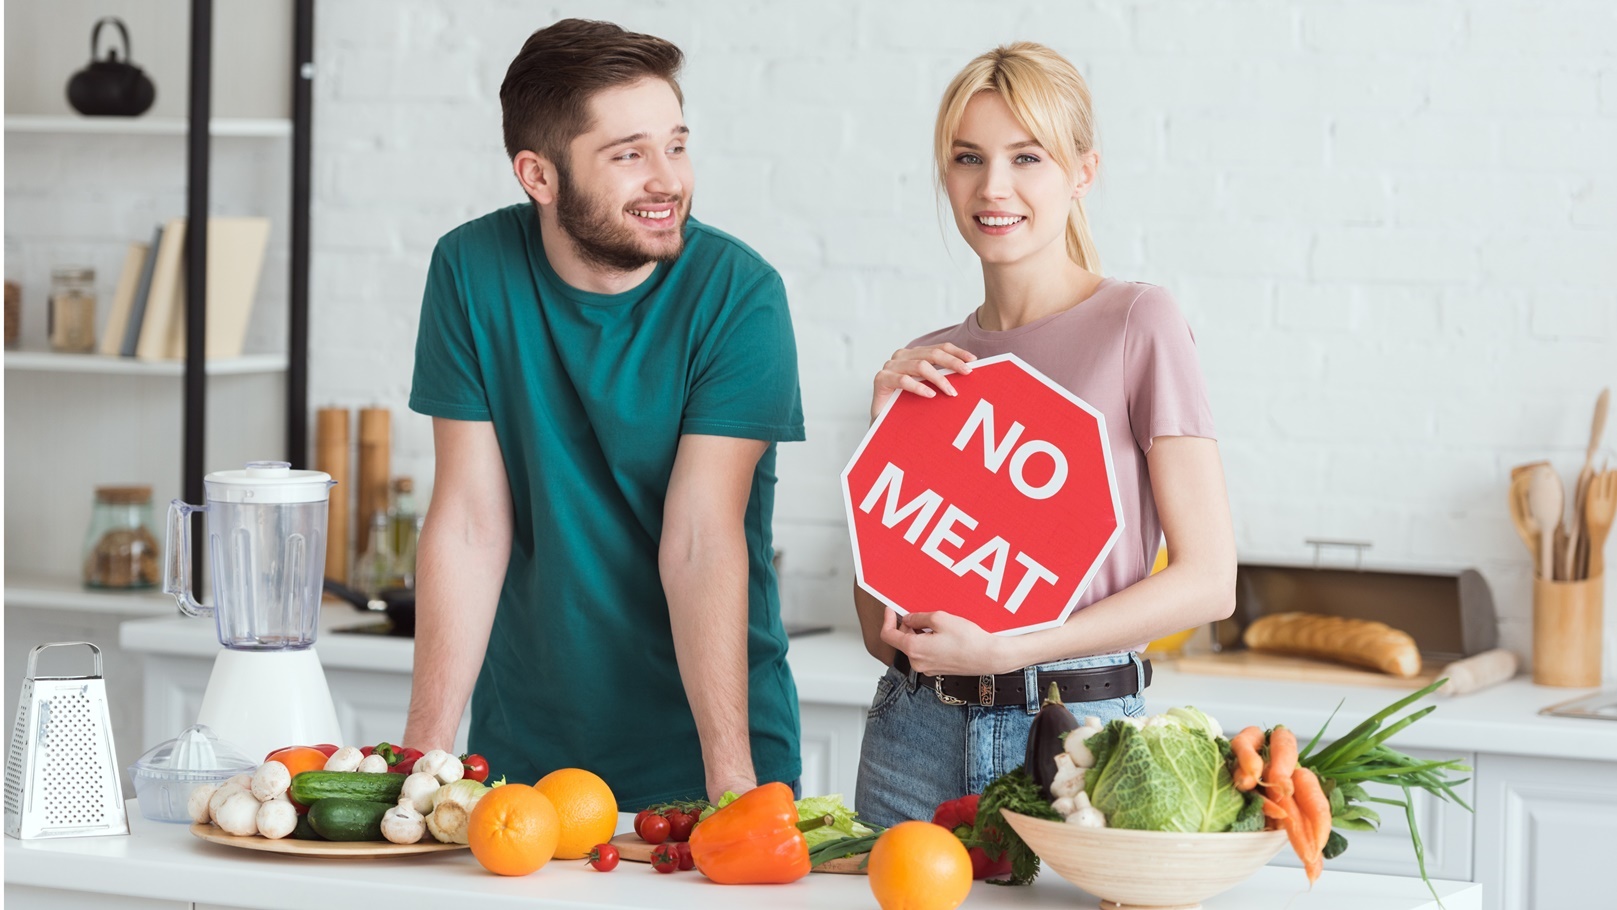 couple-of-vegans-standing-with-no-meat-sign-at-kit-2021-10-07-18-45-27-utc